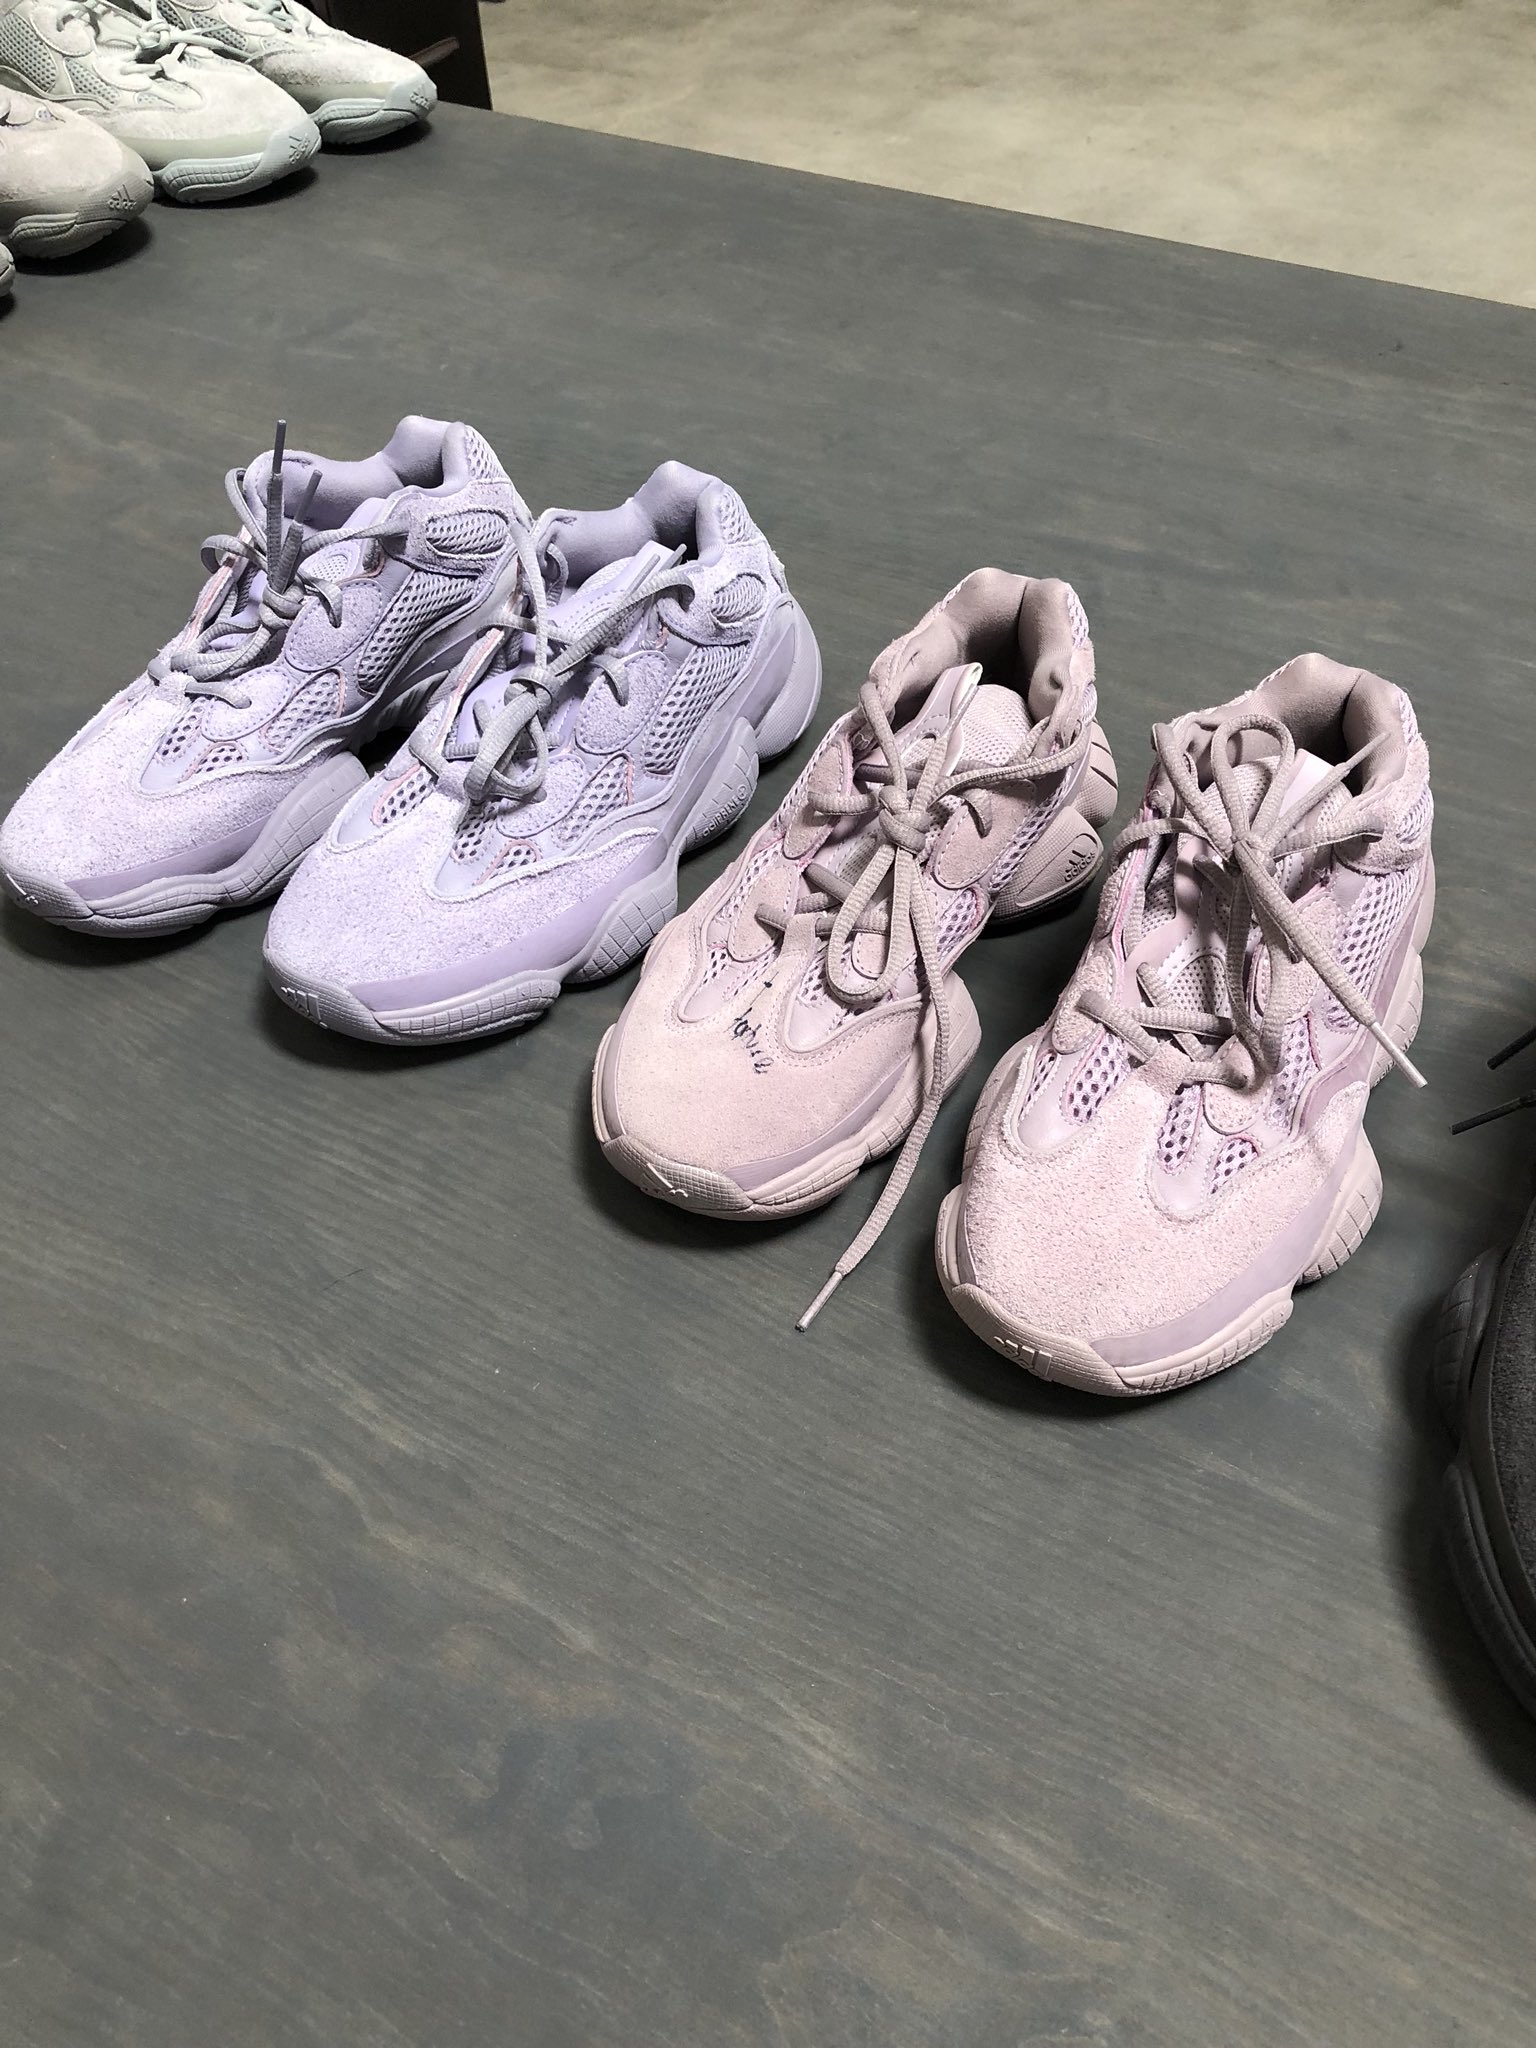 NBA likely to ban Kayne Wests Yeezy basketball shoes after collaboration  with Adidas  The Sun